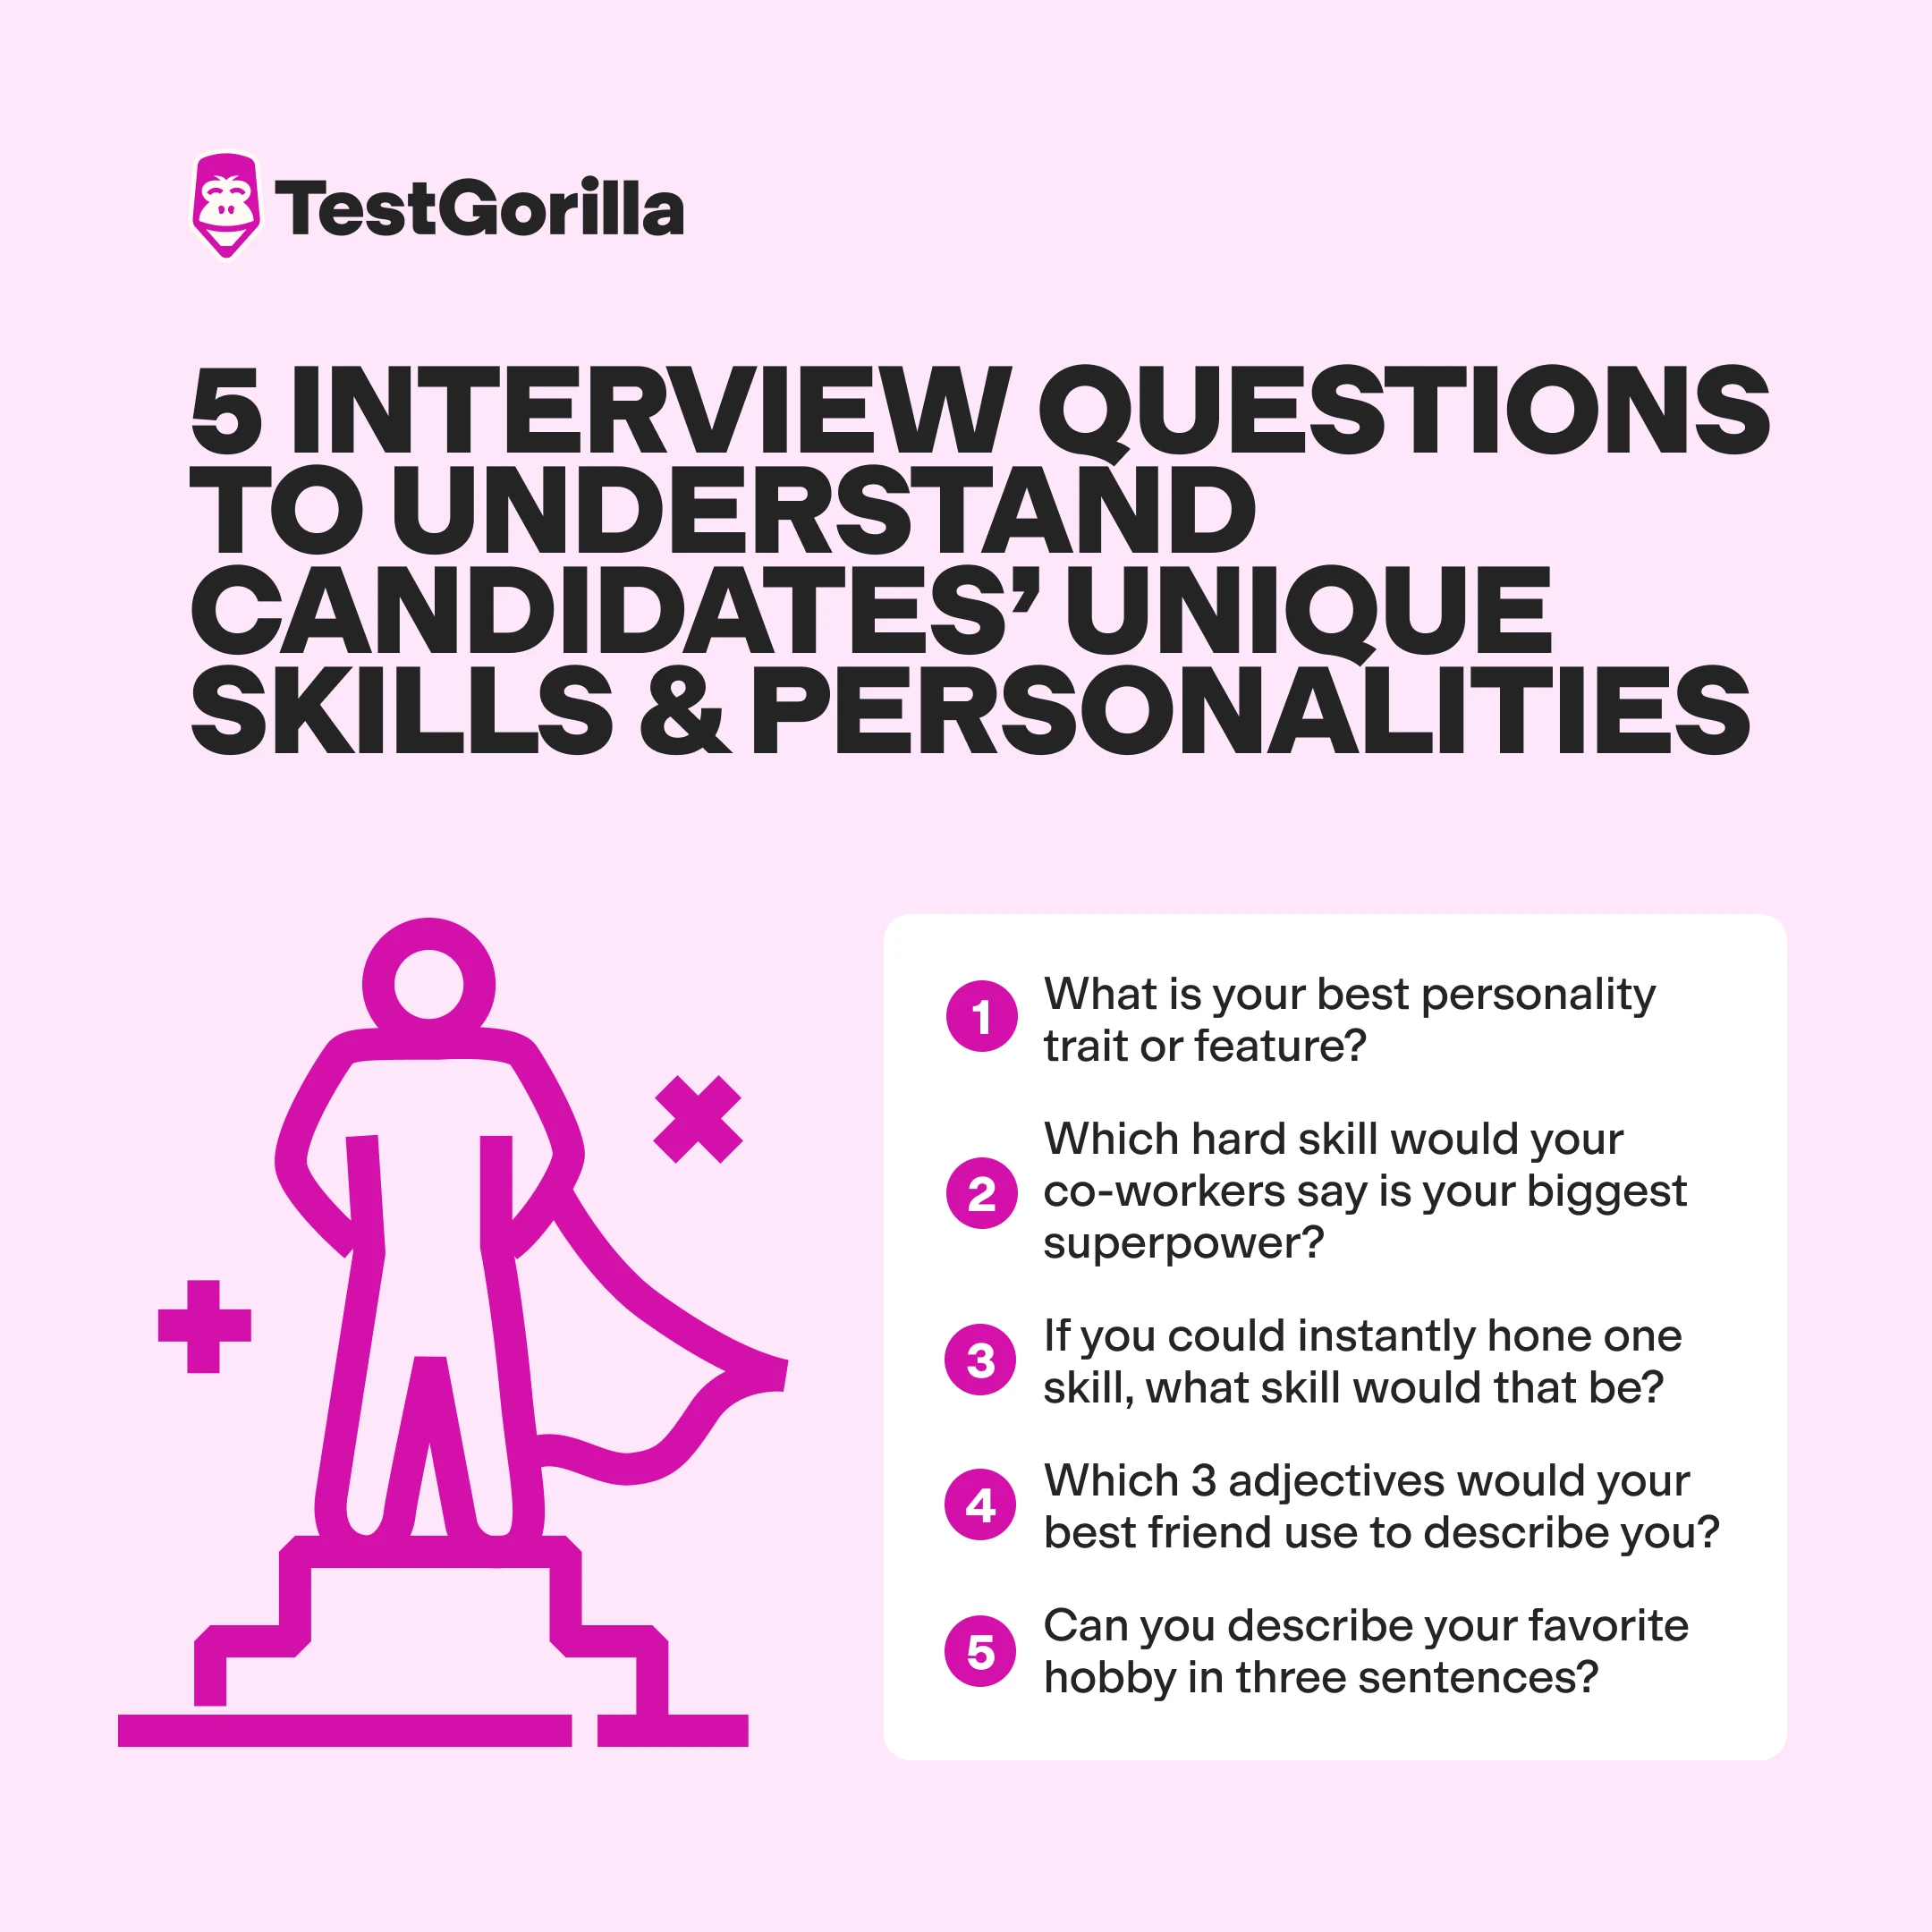 5 clever, creative interview questions to understand candidates’ unique skills and personalities